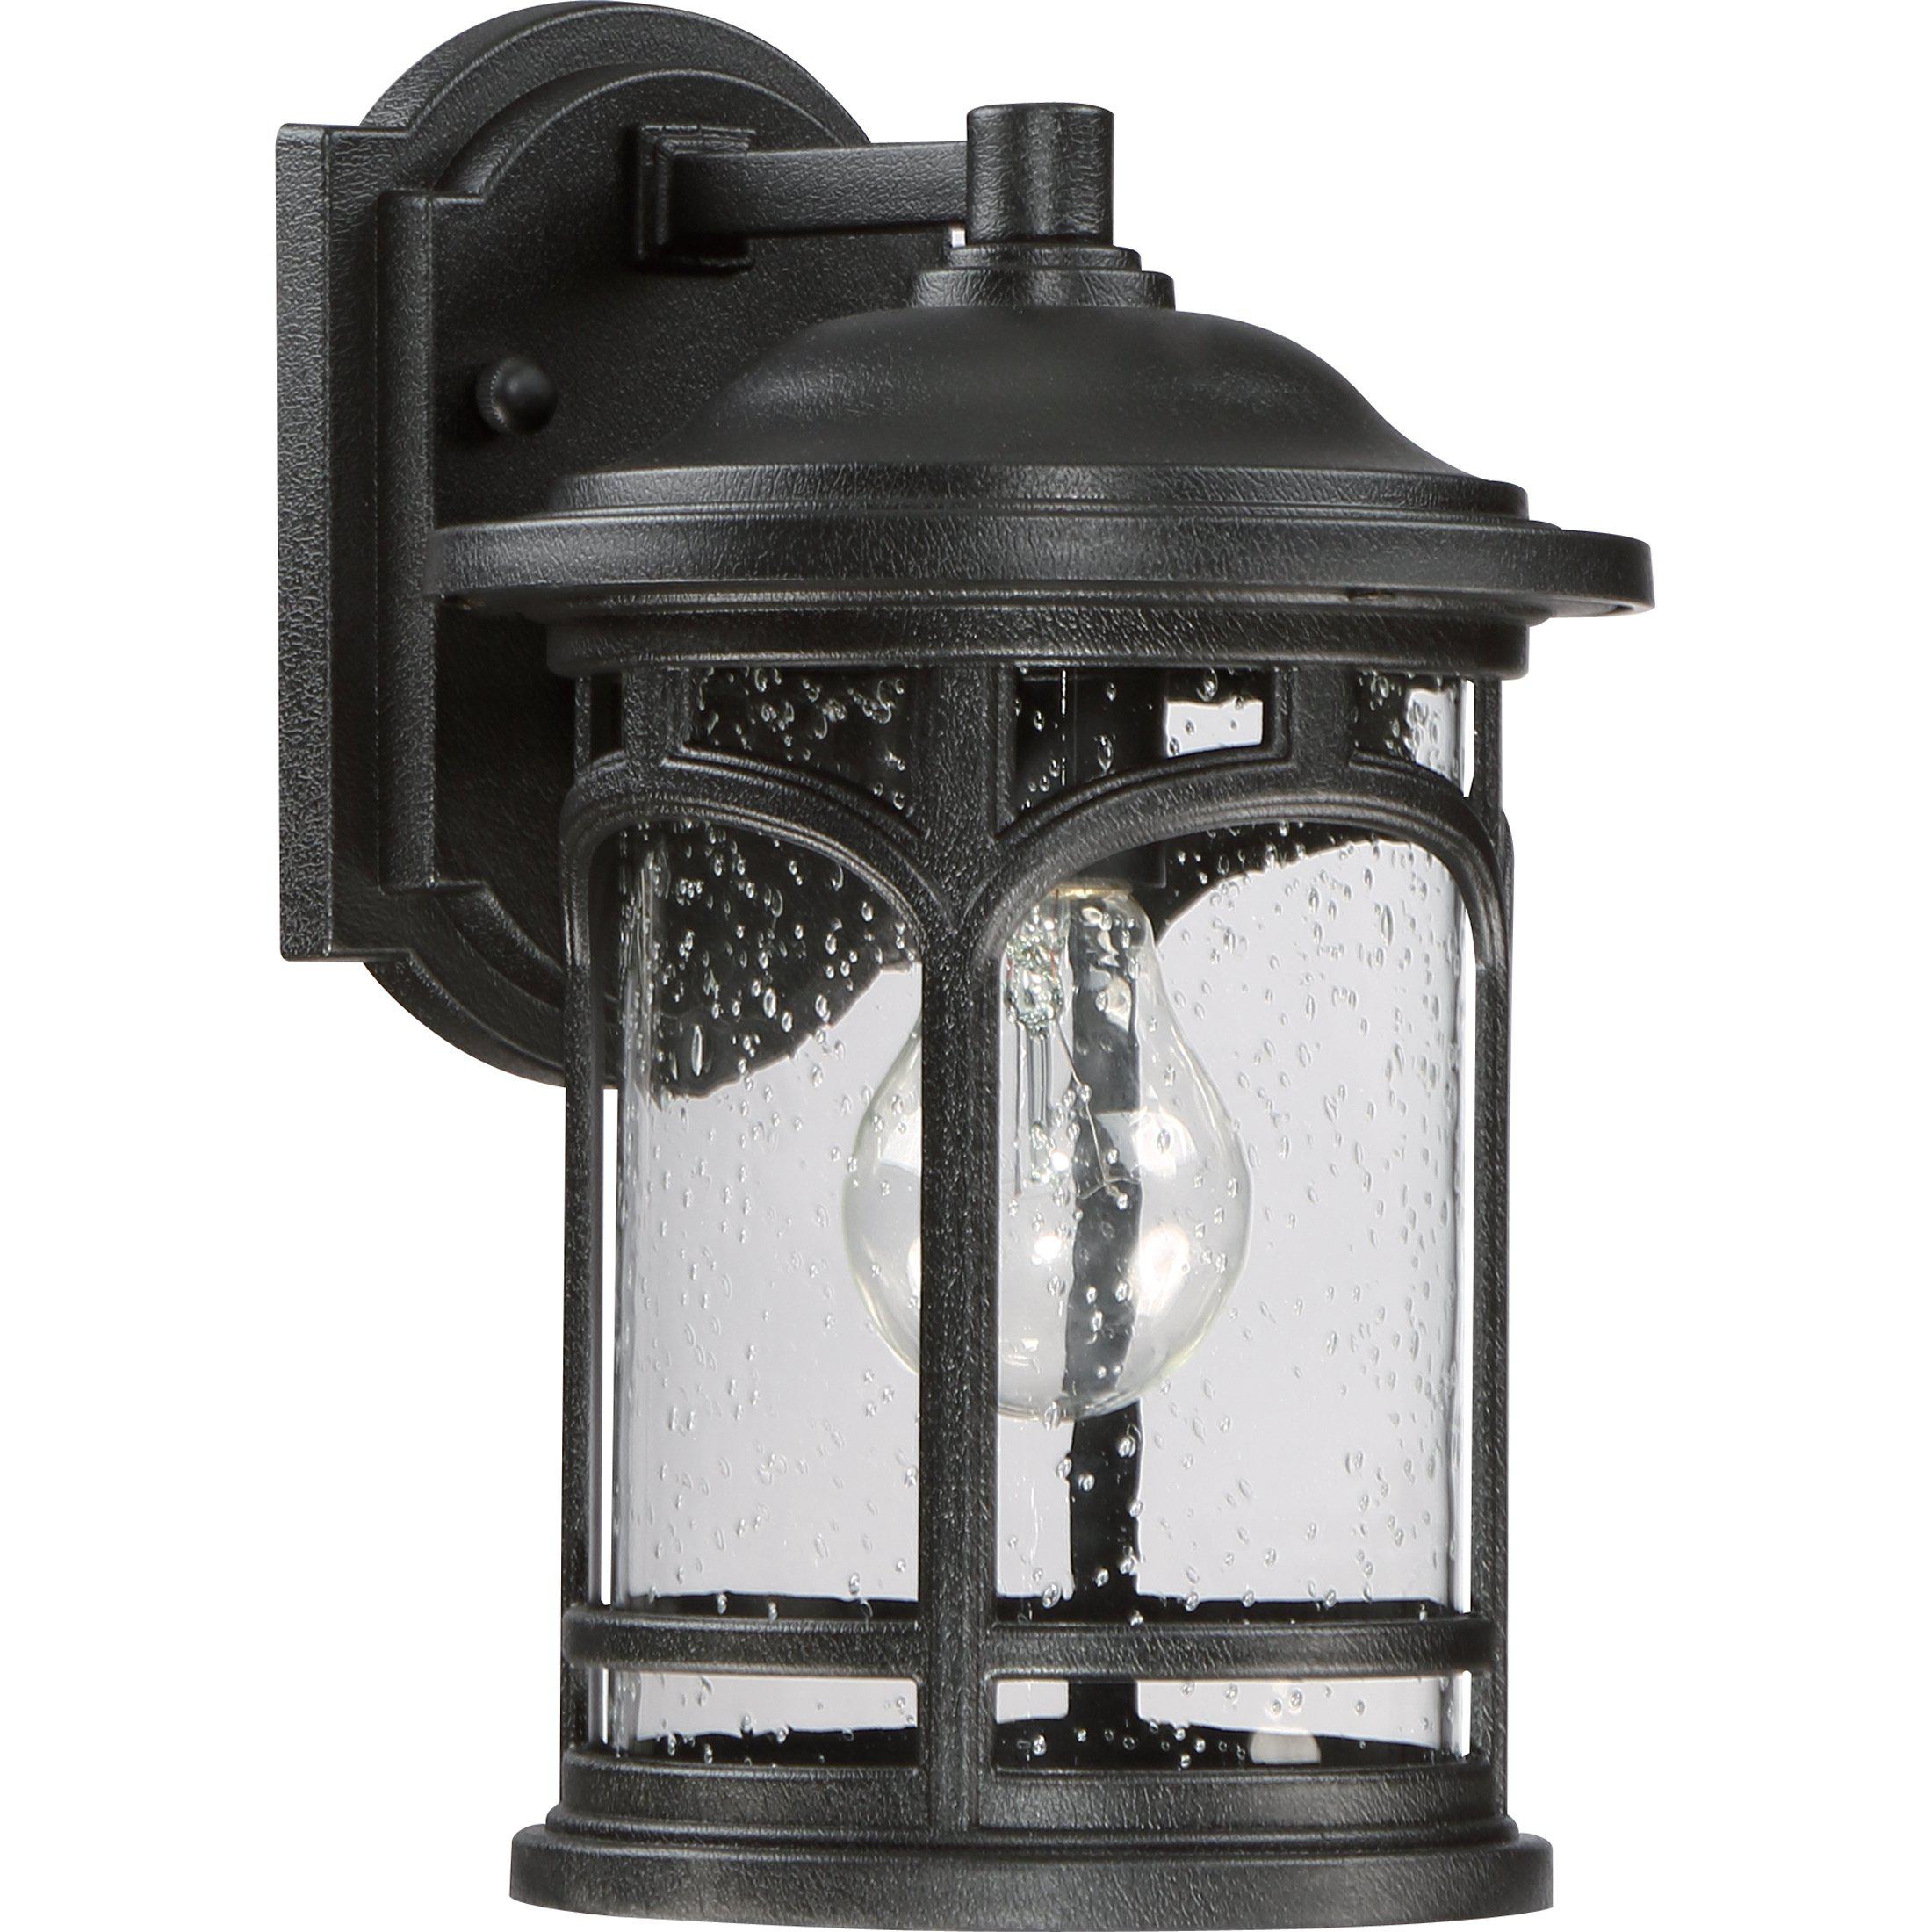 Quoizel  Marblehead Outdoor Lantern, Small Outdoor l Wall Quoizel   